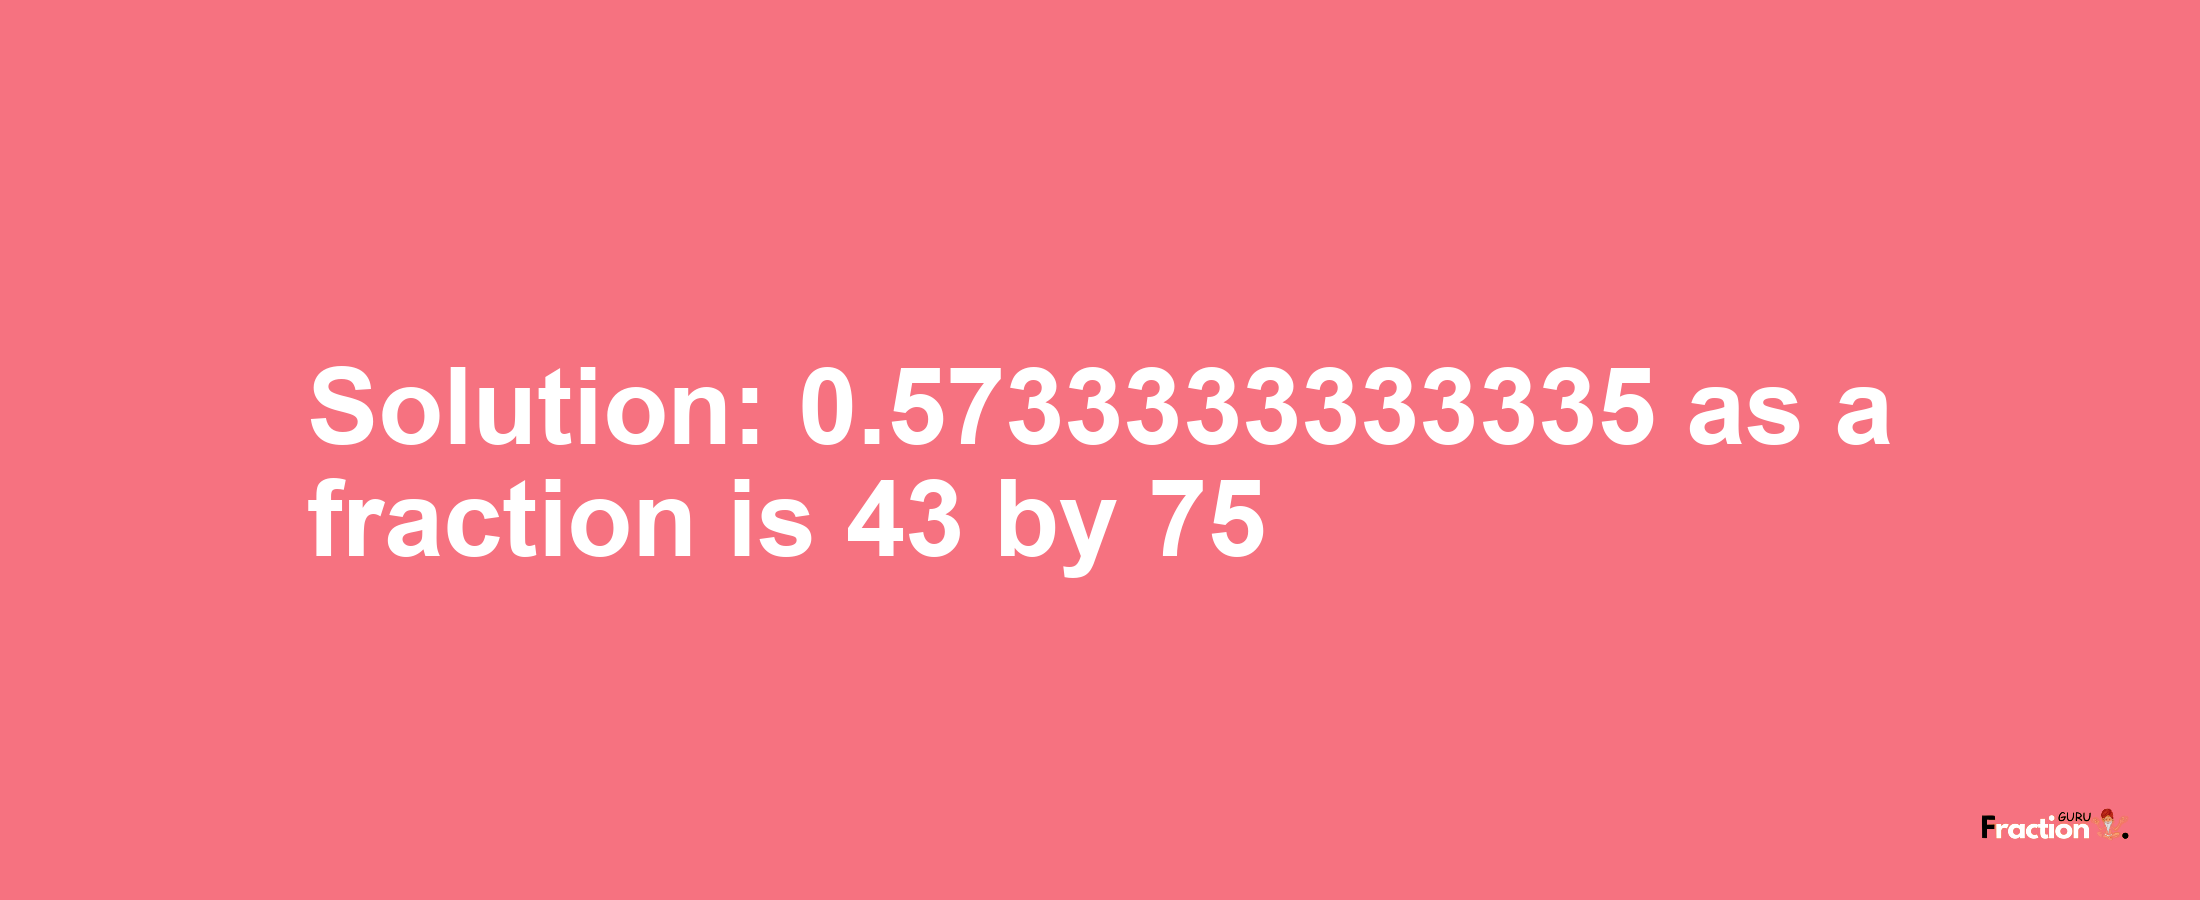 Solution:0.5733333333335 as a fraction is 43/75